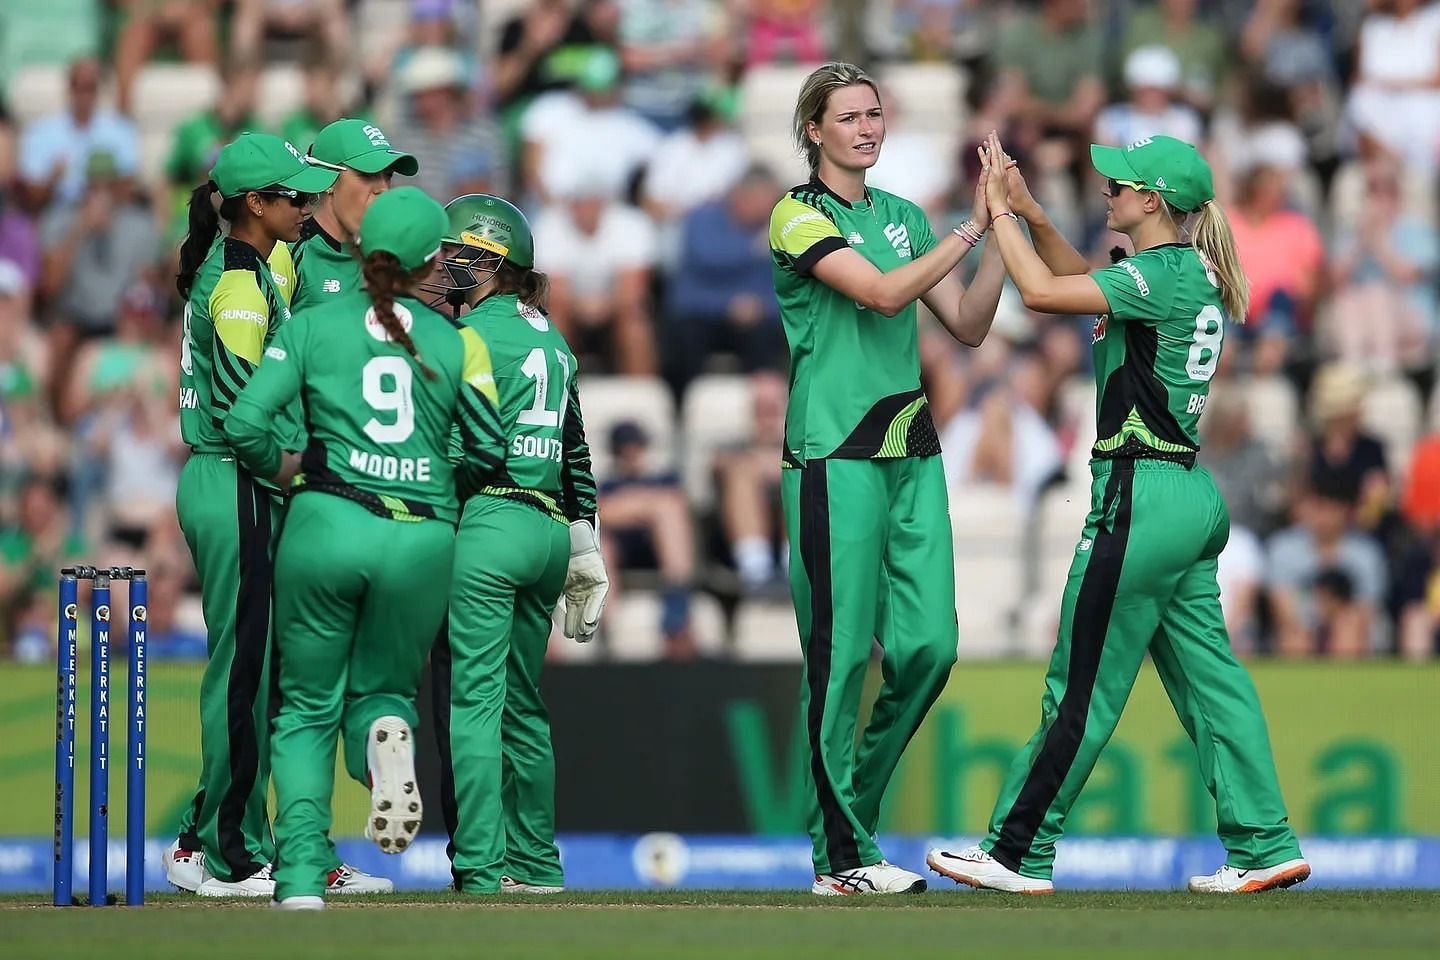 Southern Brave Women in action (Image Courtesy: The Hundred/ECB)